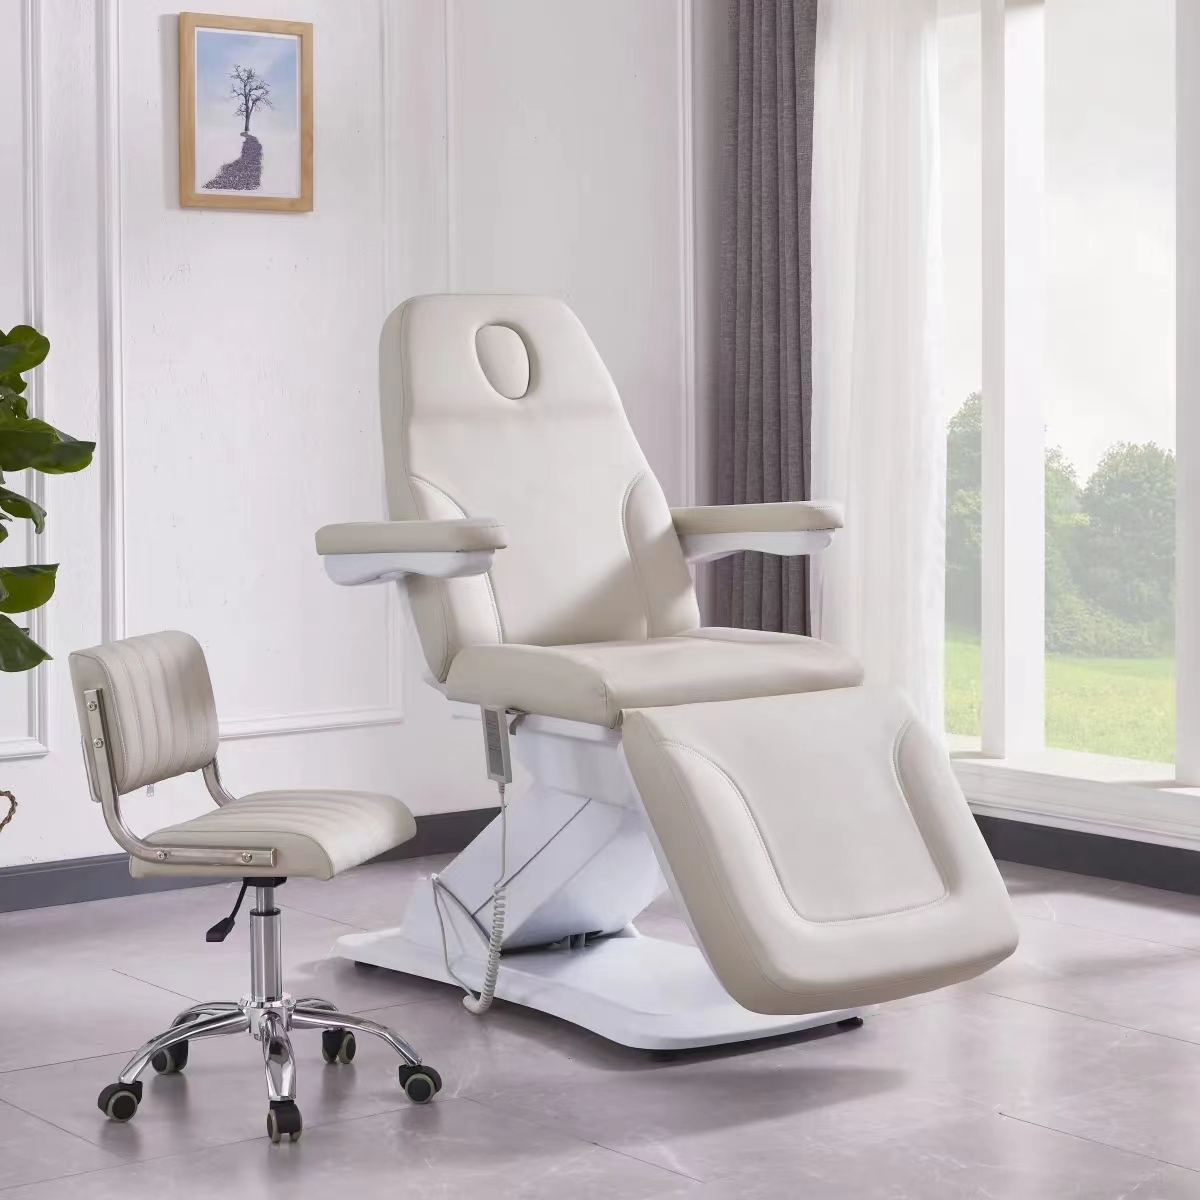 M825 electric facial bed SPA cosmetic chair